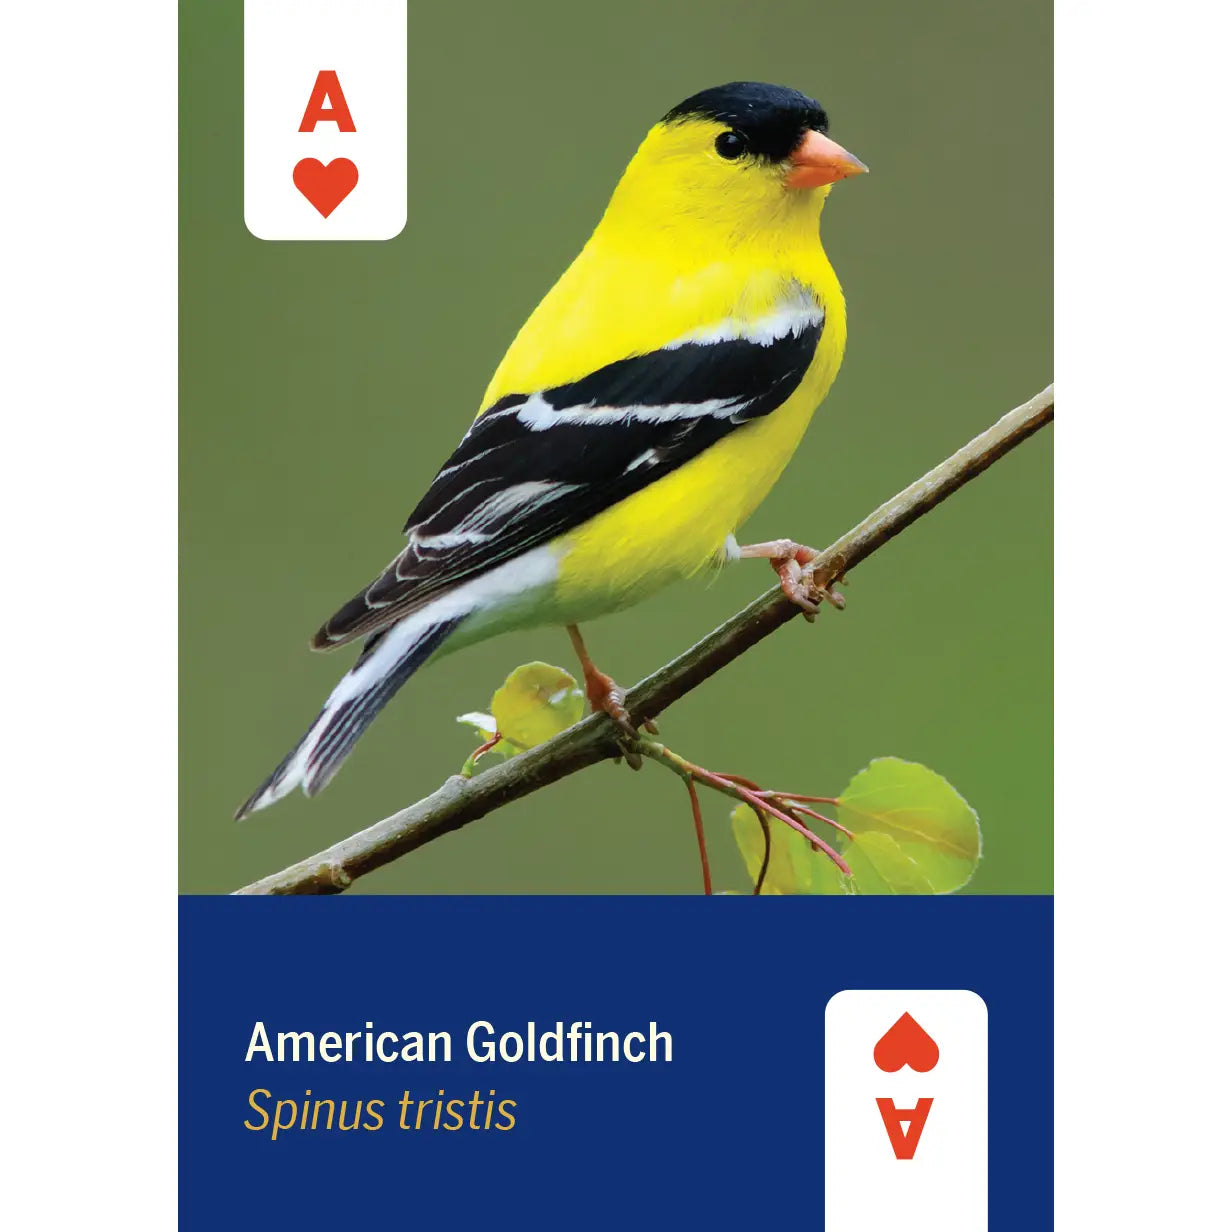 Birds of North America Playing Cards